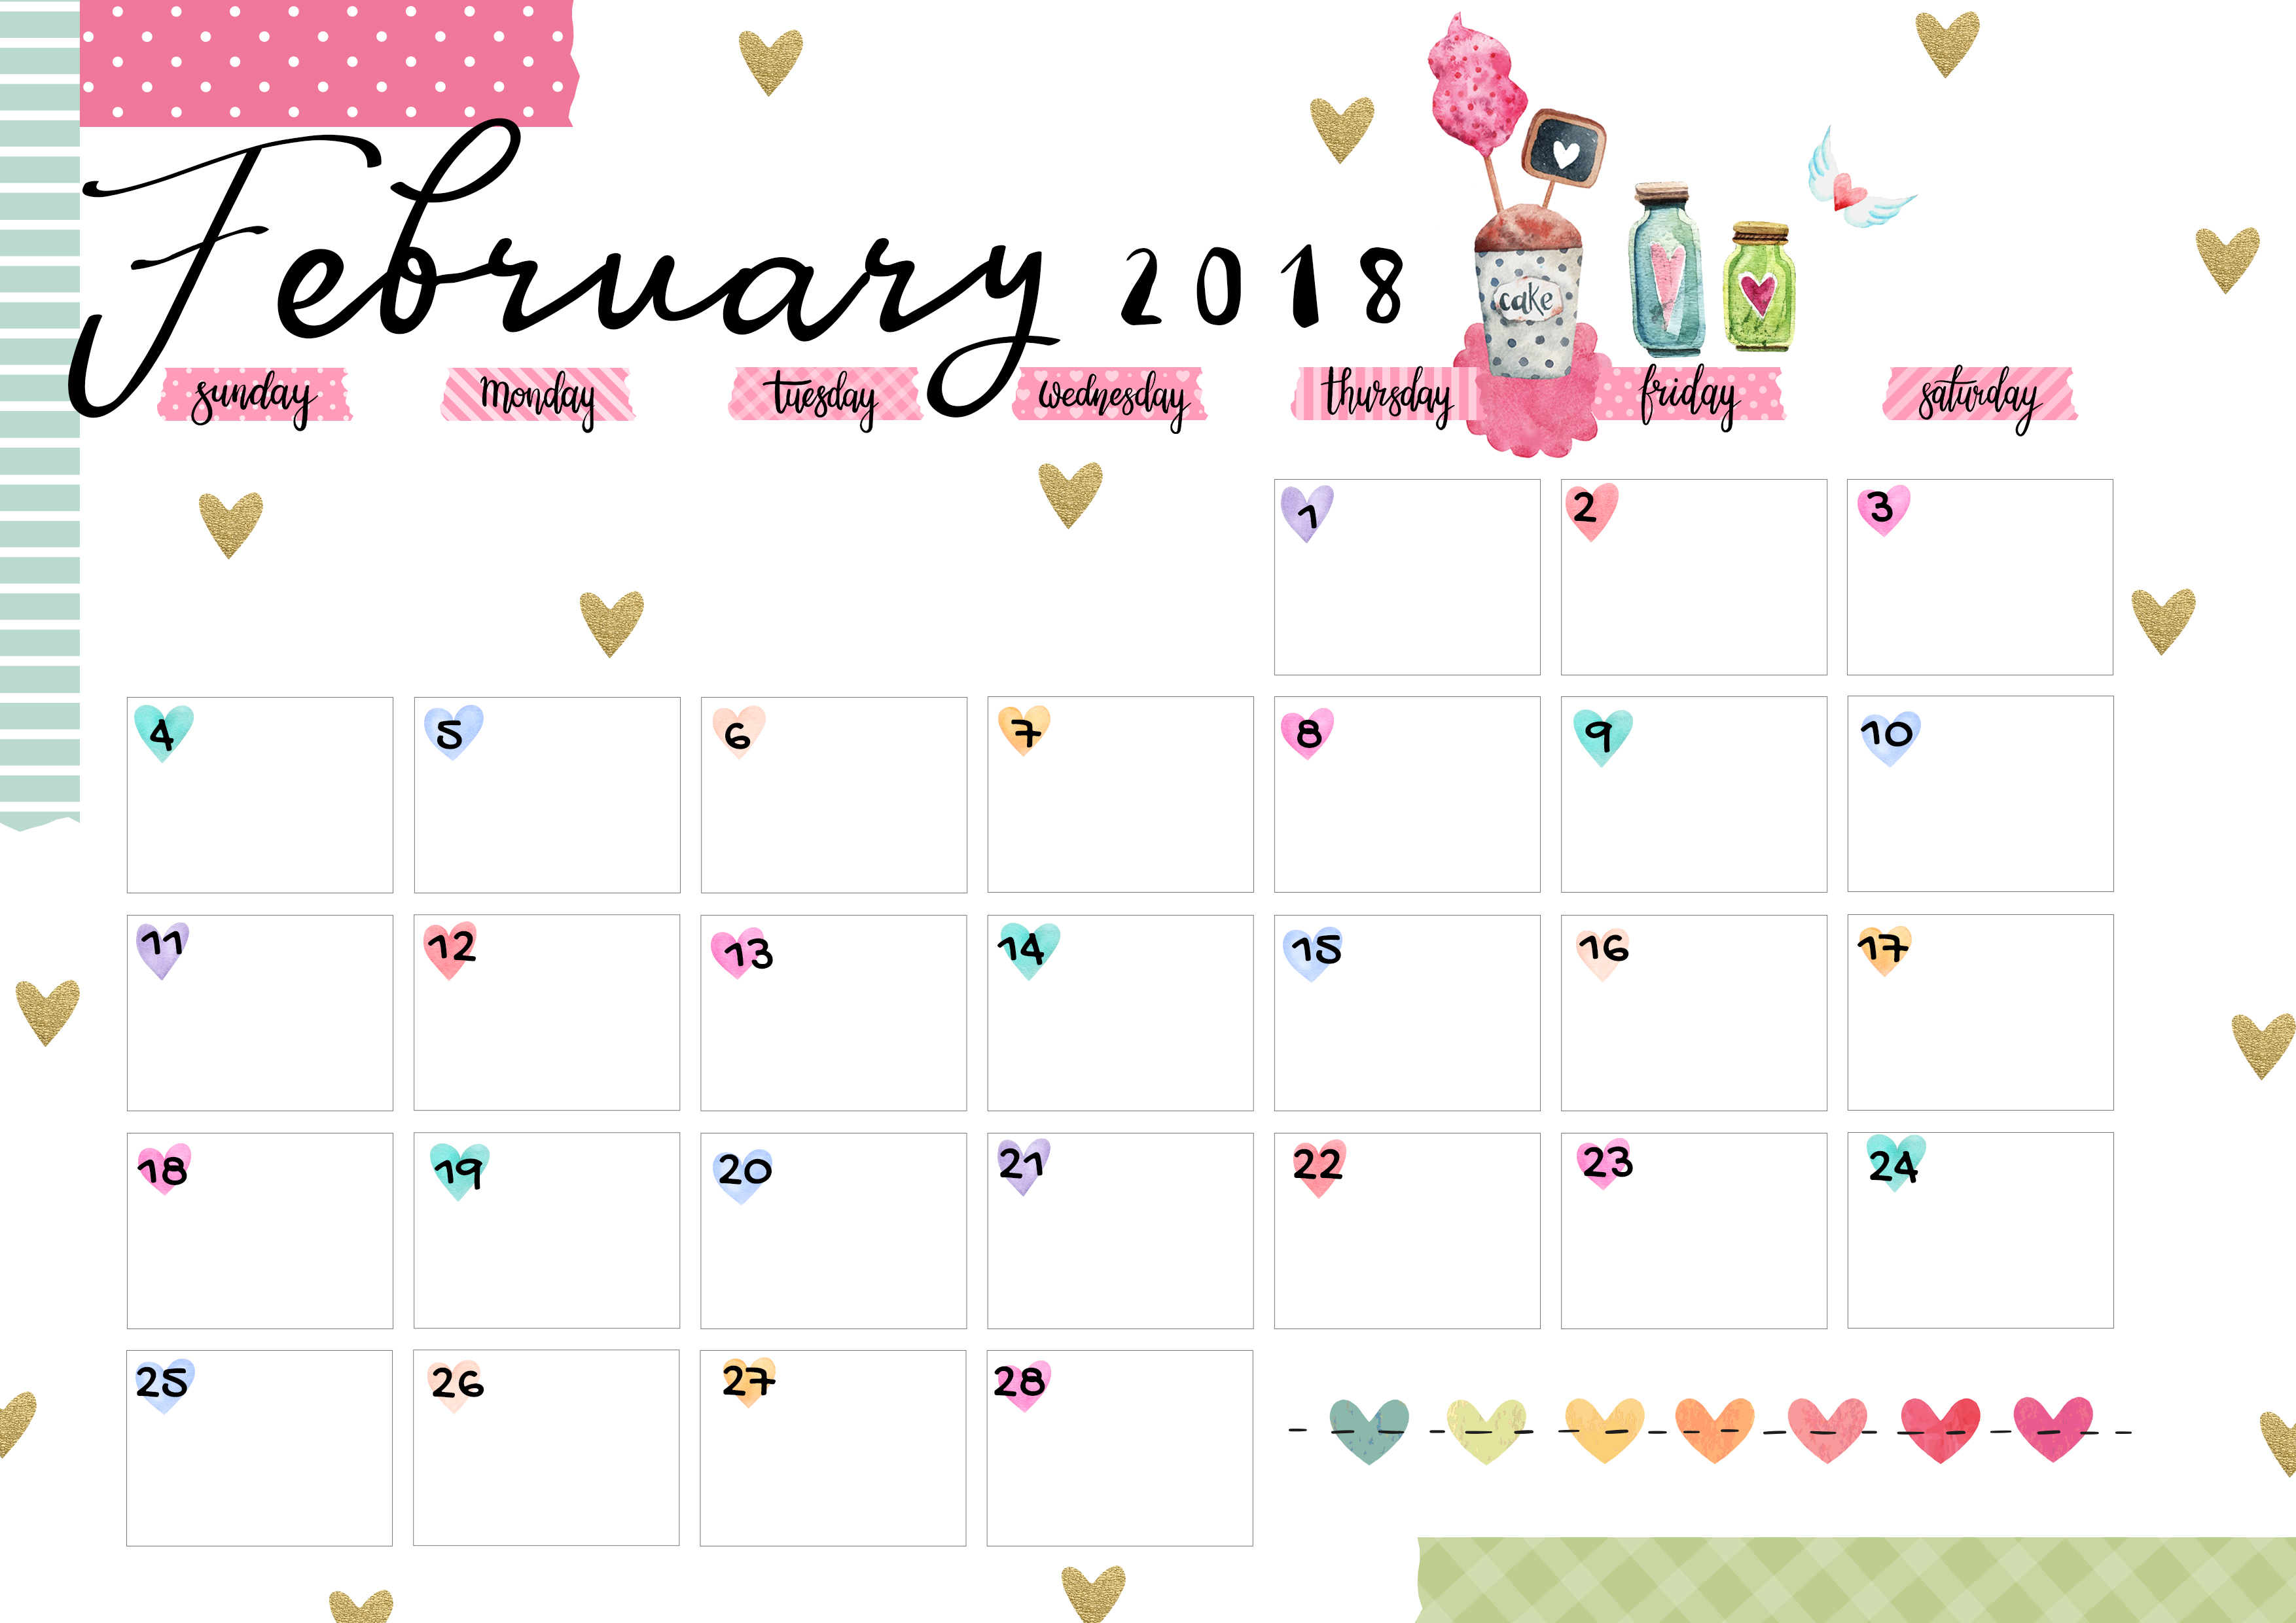 february-2018-calendar-with-holidays-as-picture